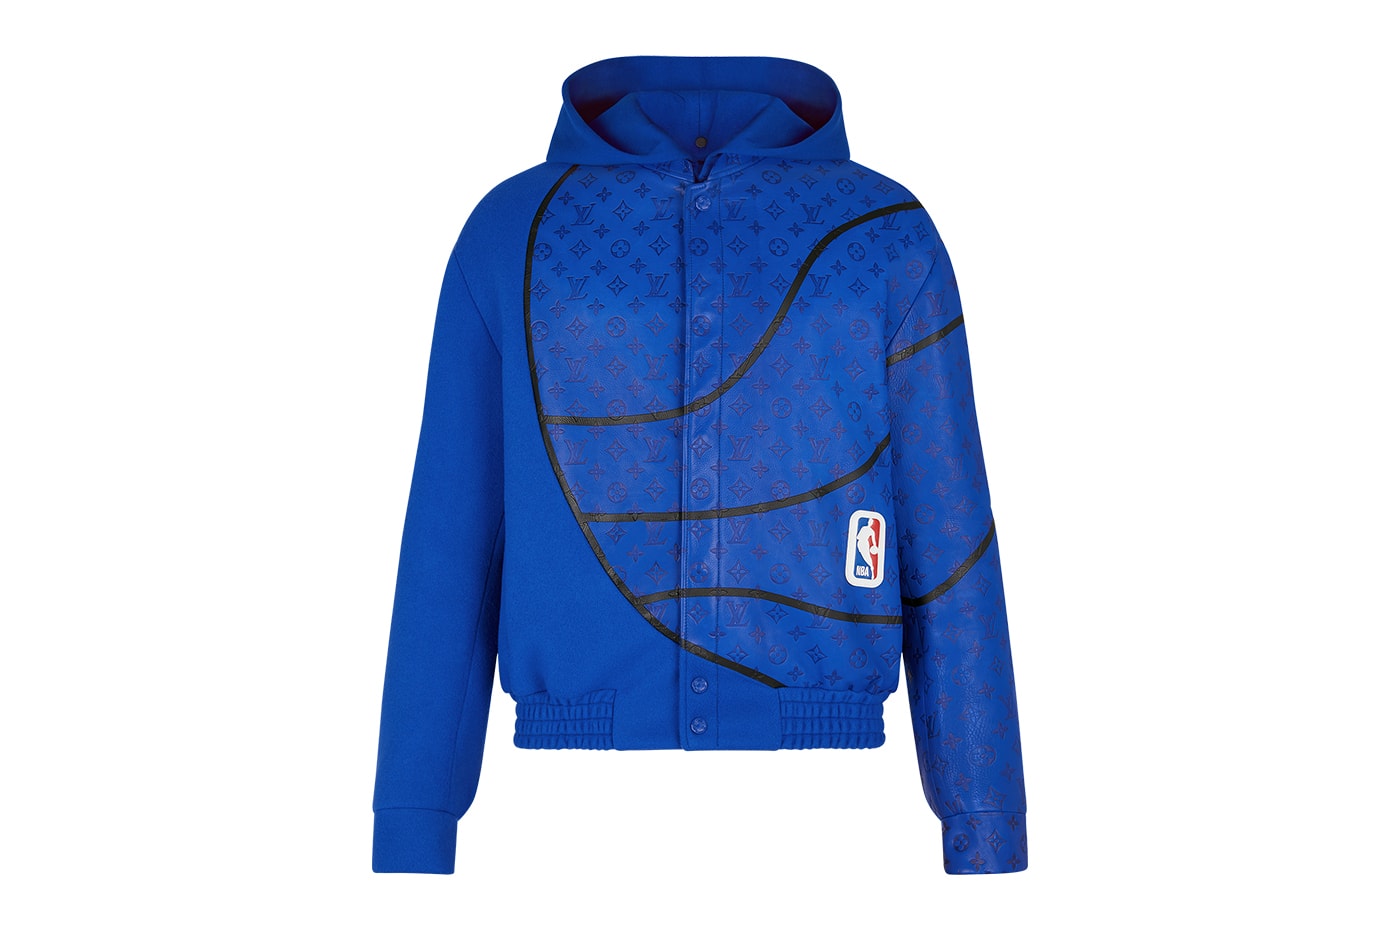 Exclusive First Look at the Louis Vuitton x NBA Capsule Collection